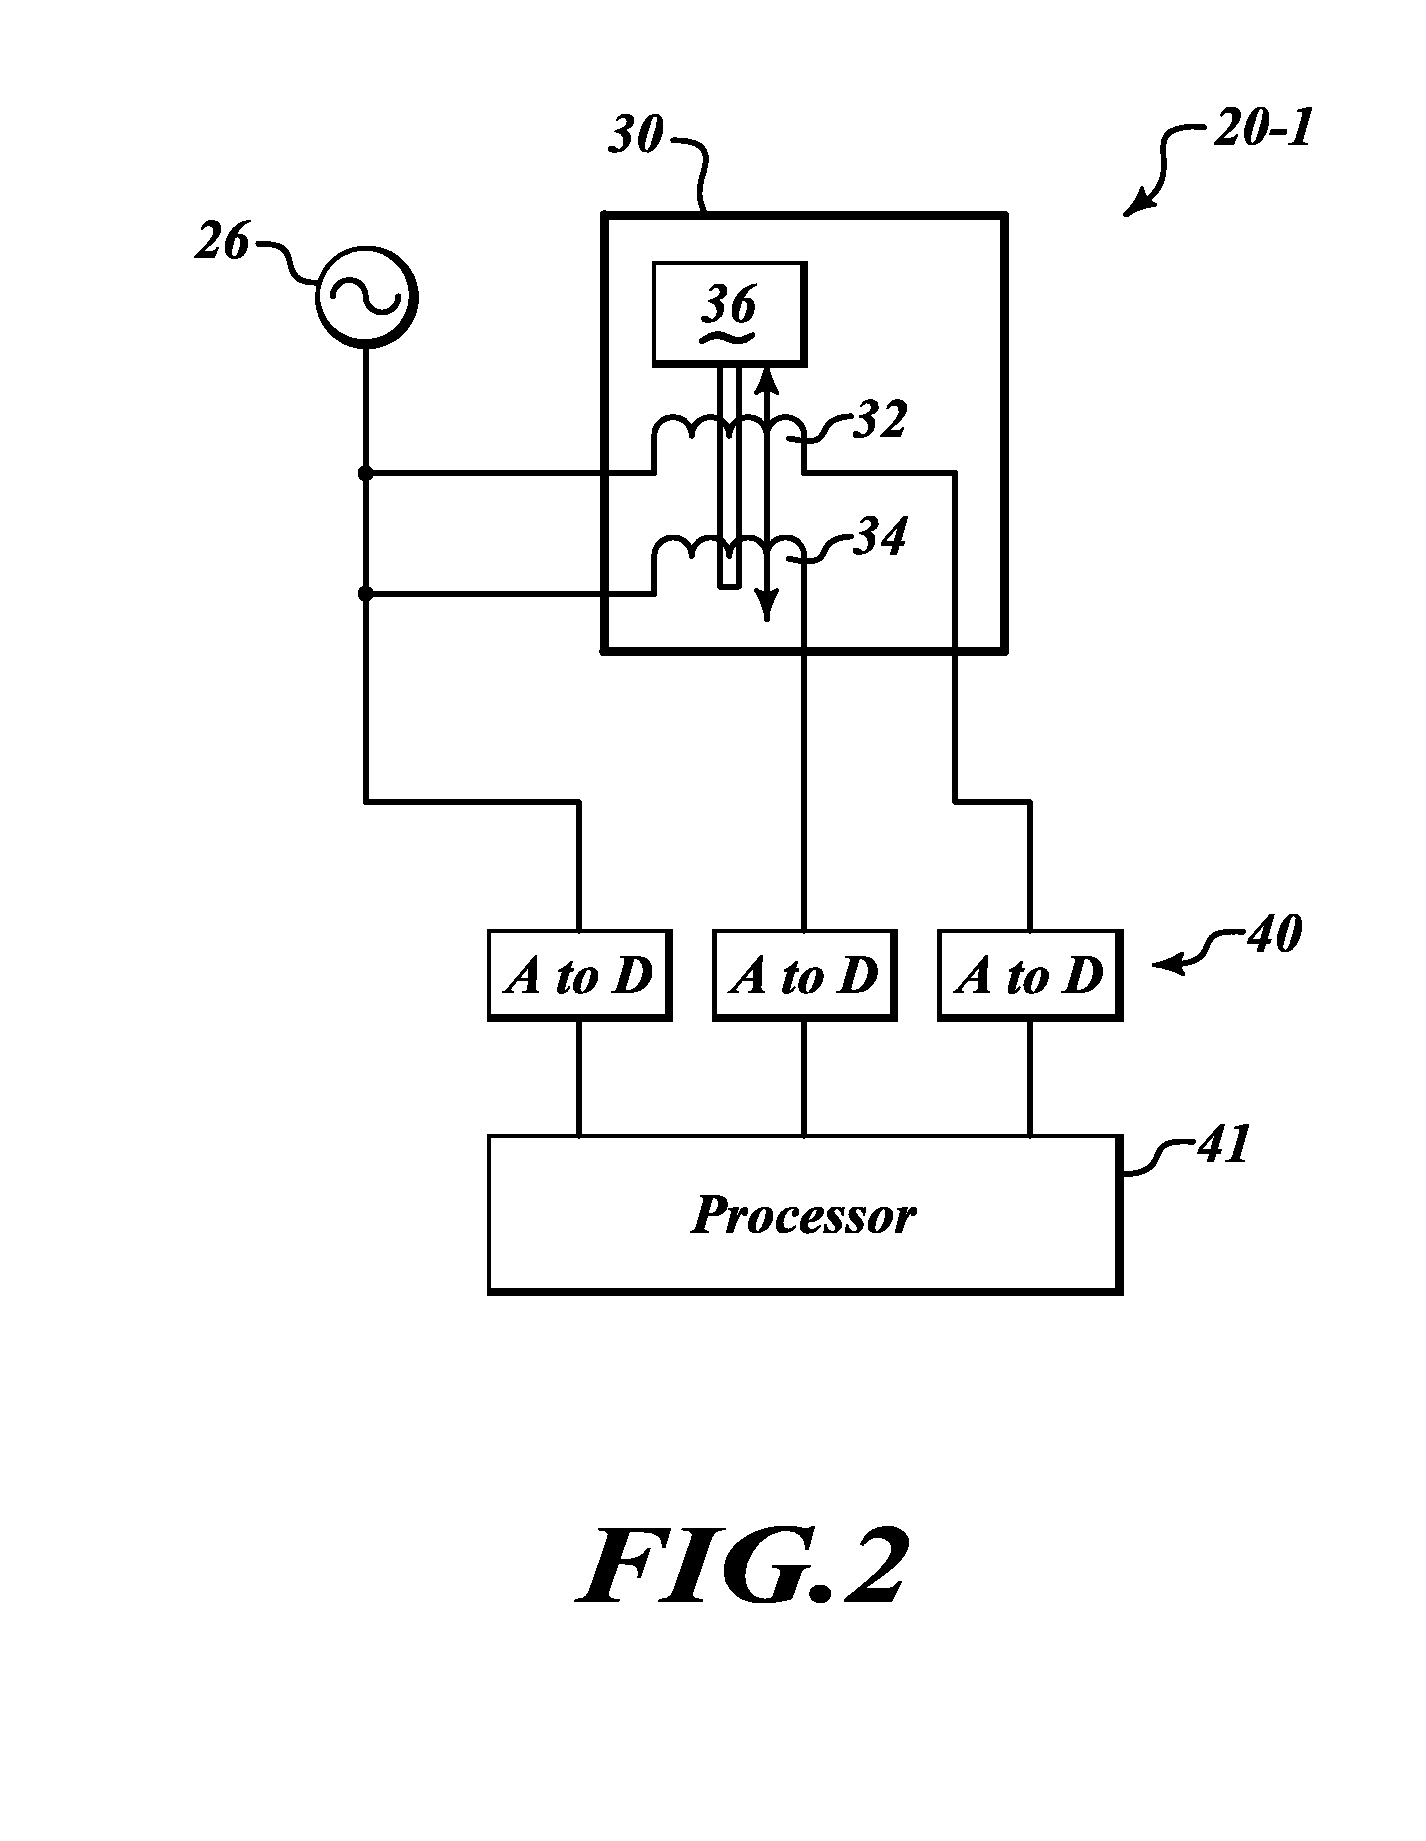 Systems and methods for performing vibration analysis using a variable-reluctance sensor